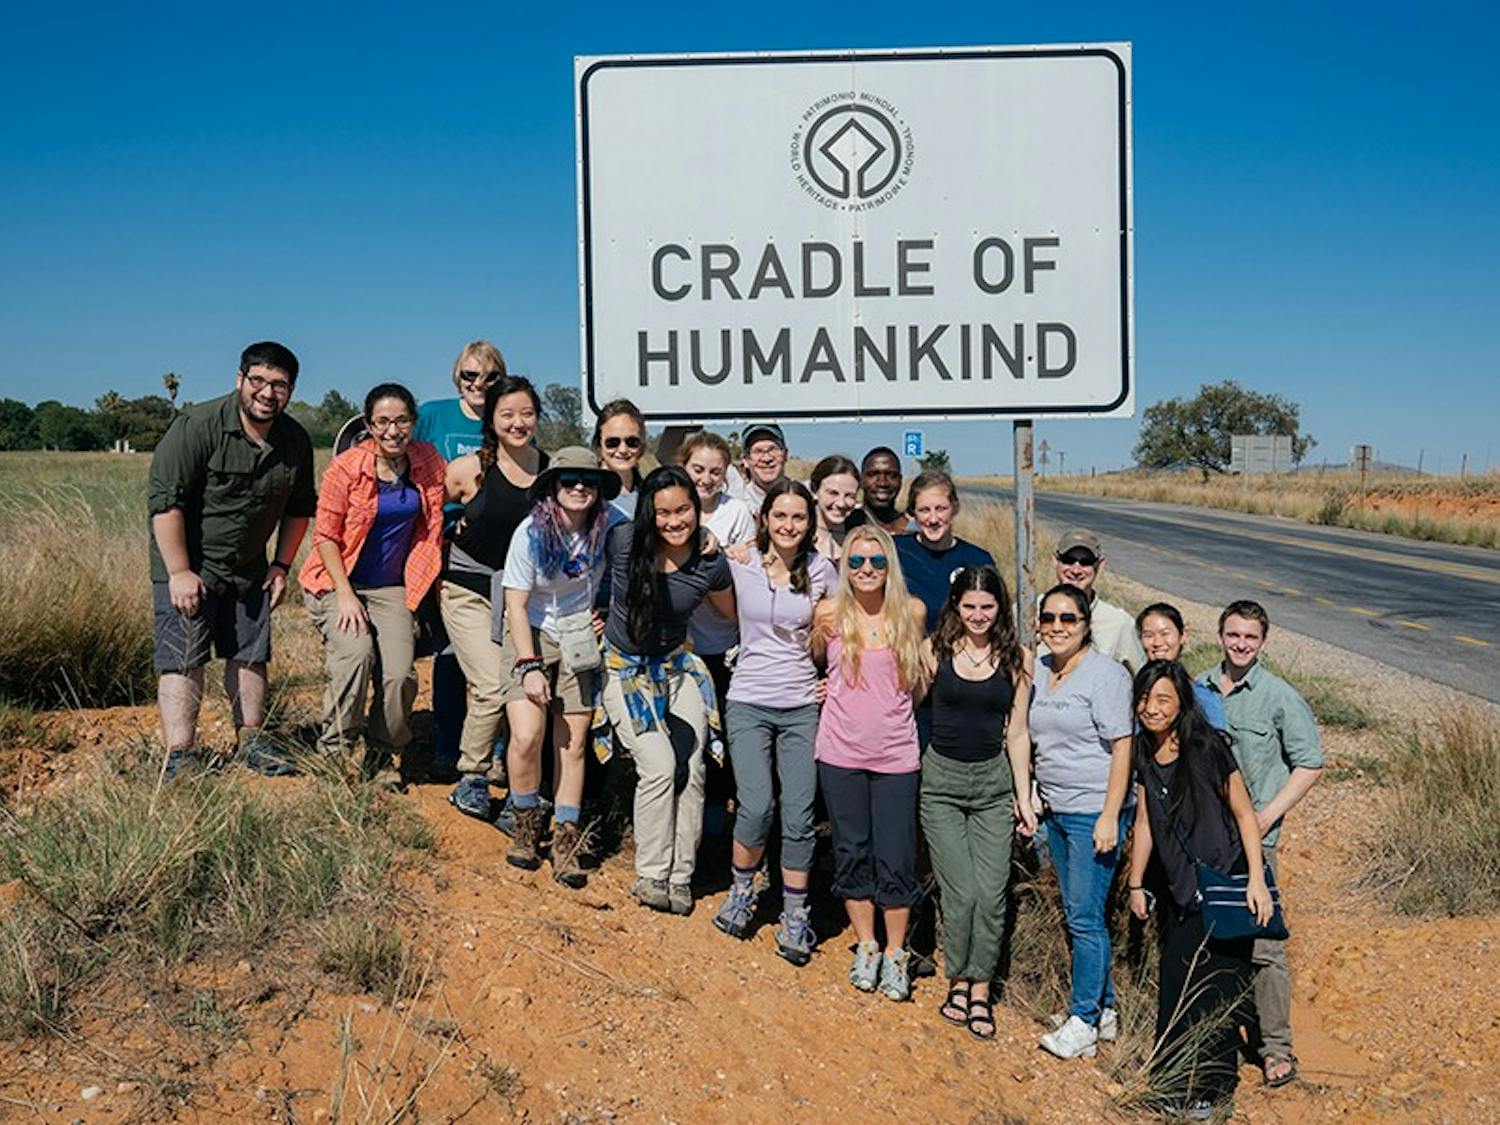 The class poses at the entrance to the Cradle of Humankind World Heritage Site, a region famous for the many hominid species discovered there. During their week at the Cradle of Humankind, the students visited several archaeological sites and worked on a dig.

Front row: Adam Nemeroff, an instructional designer who traveled with the class; Jessica Kittleberger ’18; Kathy Li ’17; Keira Byno ’19; Elizabeth T. K. (Kalei) Akau ’18; Katherine Clayton ’18; Lauren Gruffi ’17; Olivia Wiener ’19; Cindy Ramirez ’18; Saemi Han ’18. Back row: Ellison McNutt GR; Jacqueline Saralegui ‘18; Julia Cohen ‘18; Jeremy DeSilva, one of the professors leading the class; Sarah Miller ‘19; Eric (??? Driver); Abigail Reynolds ‘17; Nathaniel Dominy, a professor who led the class with DeSilva; Erica Ng ’19; Michael Everett ‘19., South Africa, Anthropology 70